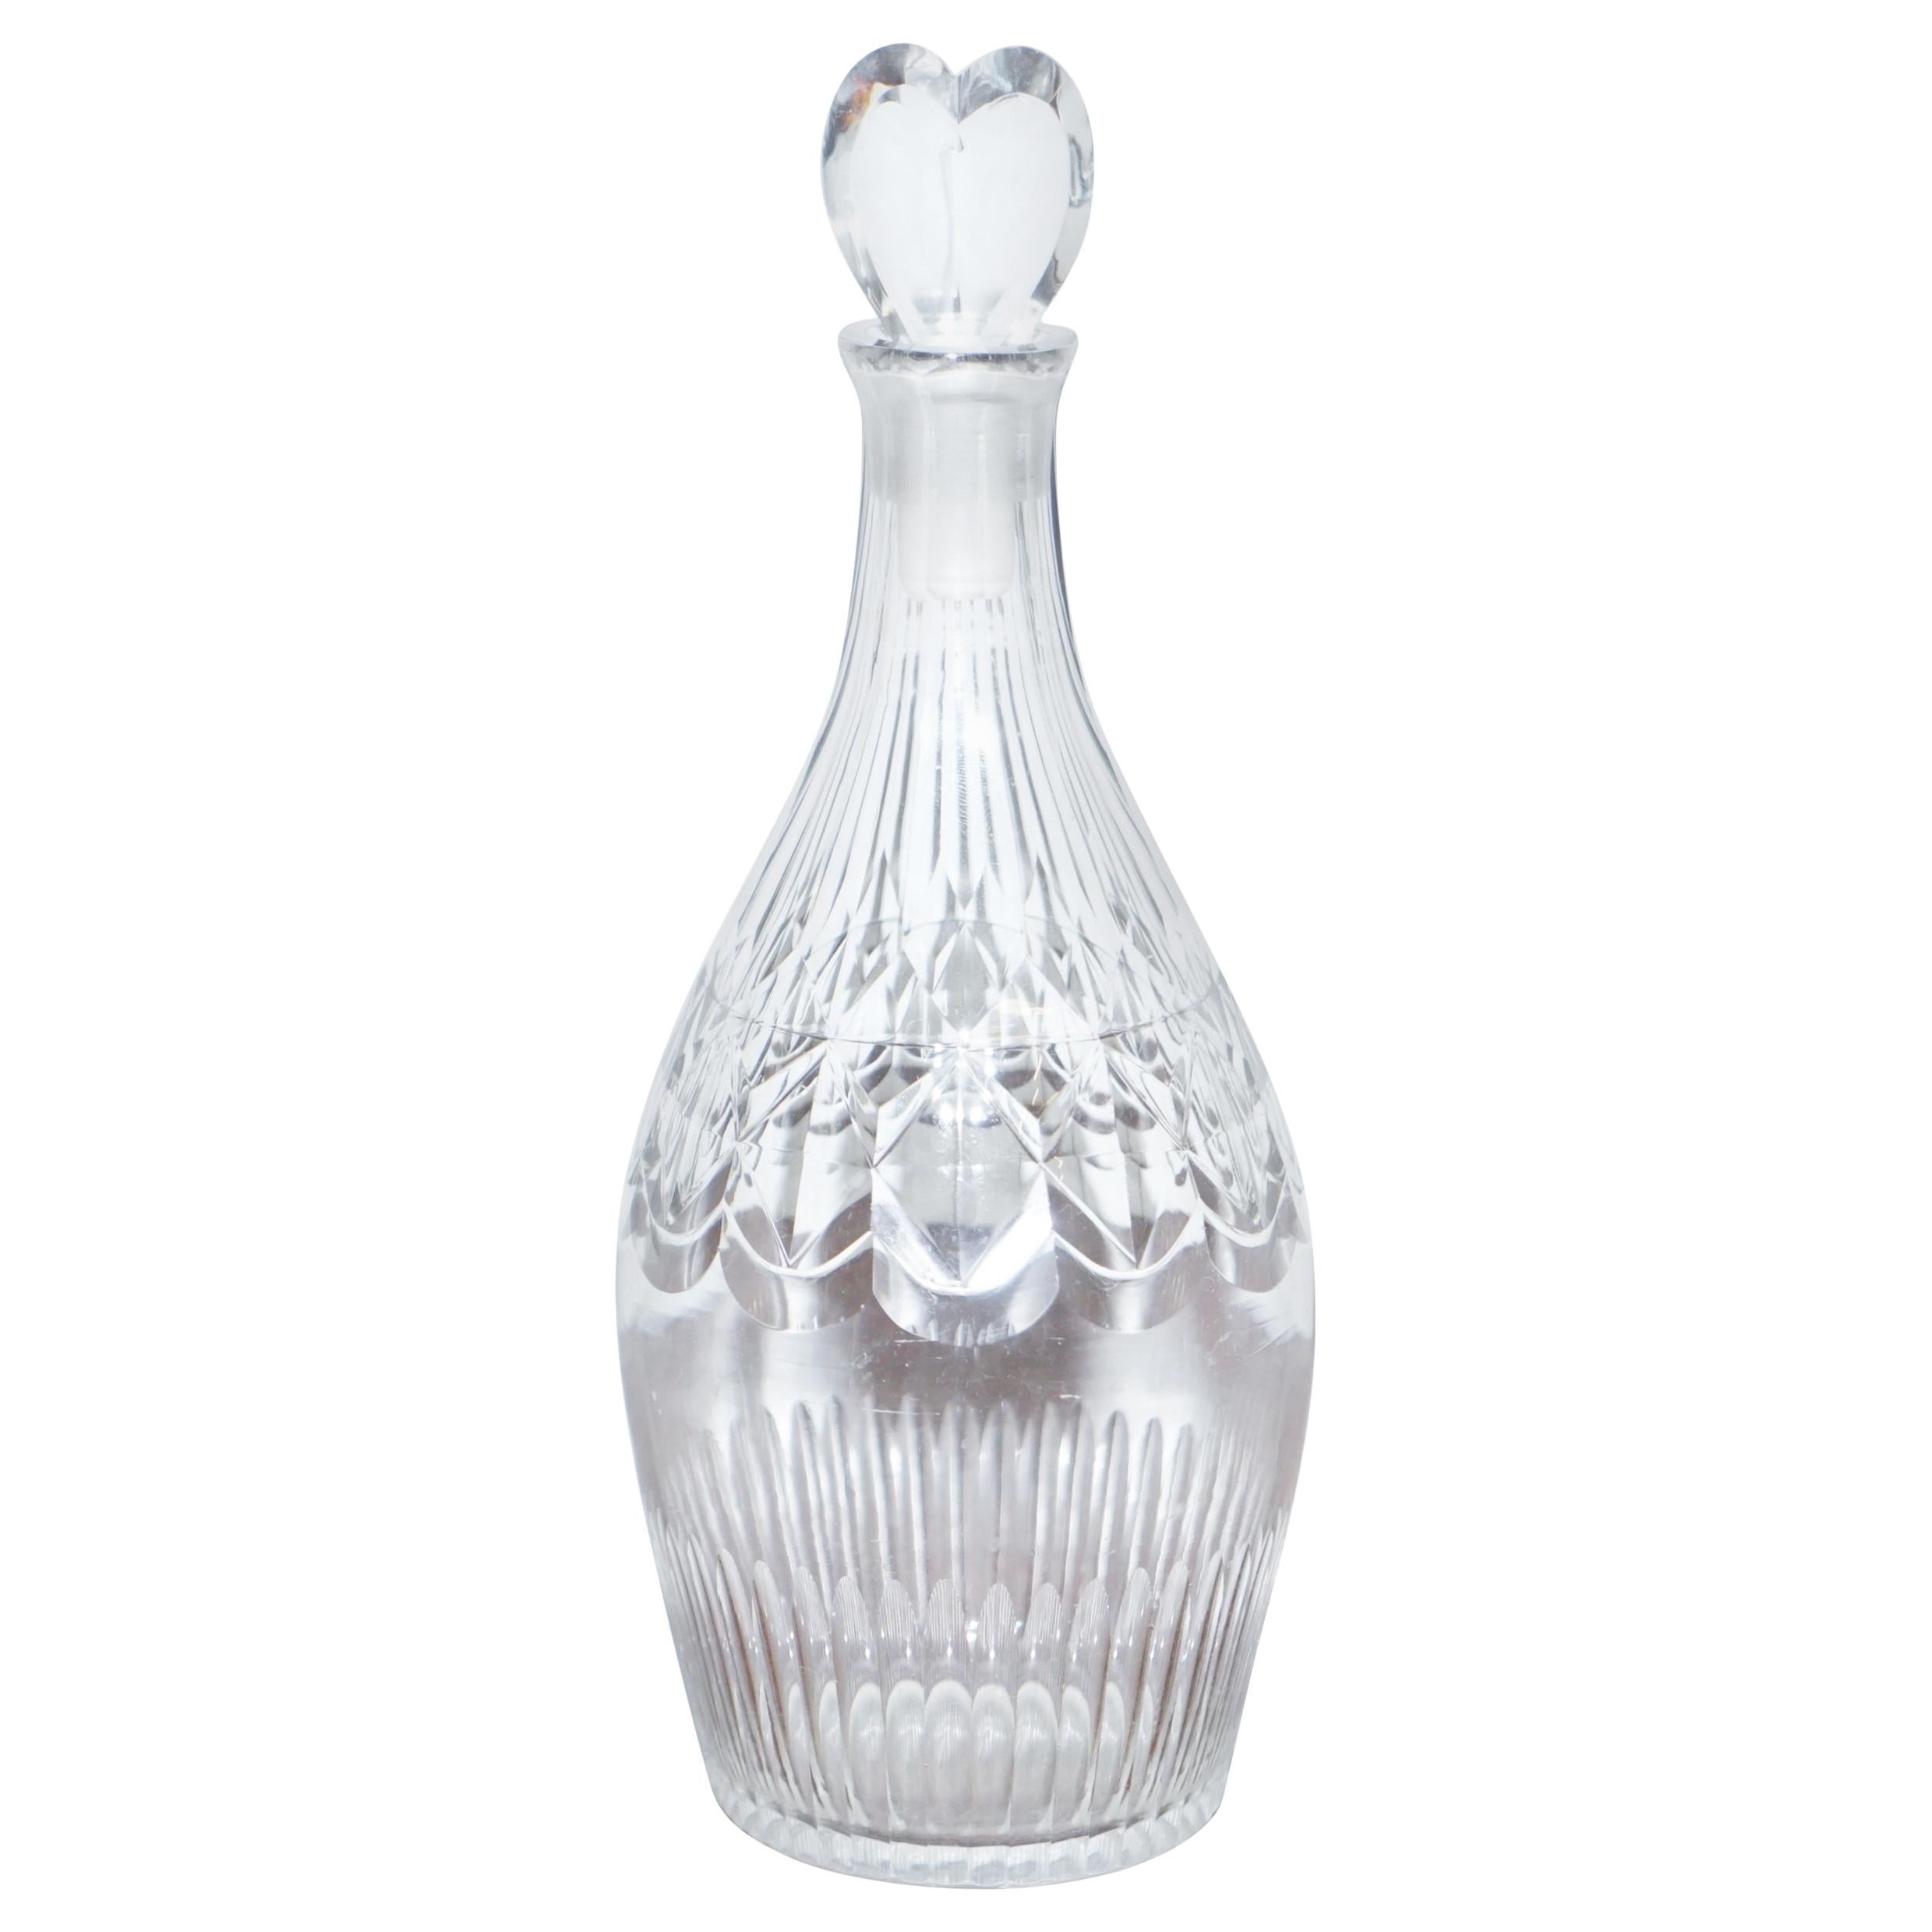 Stunning Cut Glass Crystal Decanter Handmade and Blown with Heart Stopper